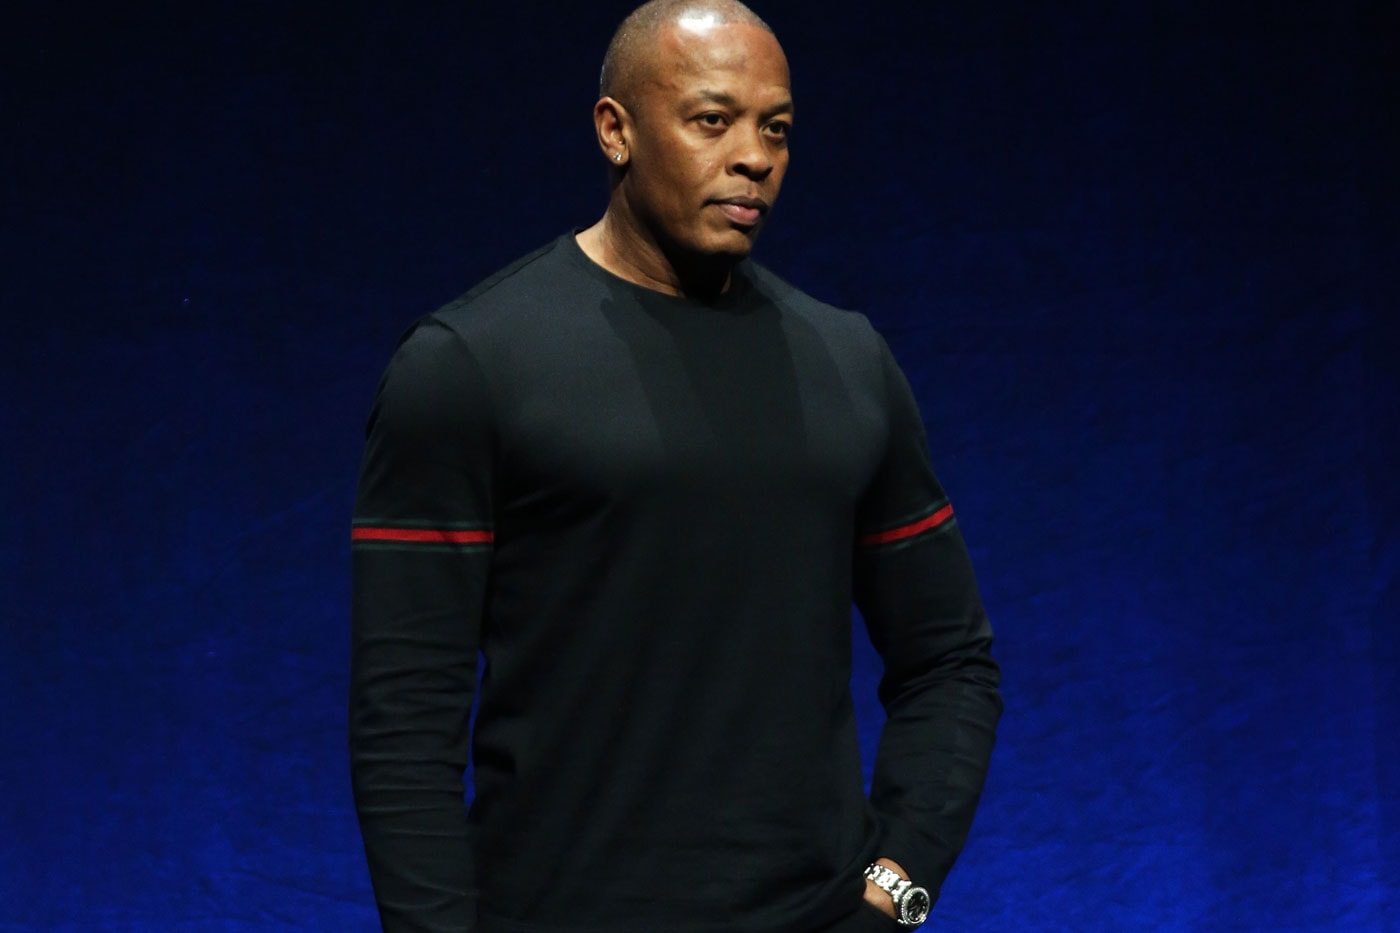 Listen to Dr. Dre's 'The Pharmacy' Episode featuring Quincy Jones